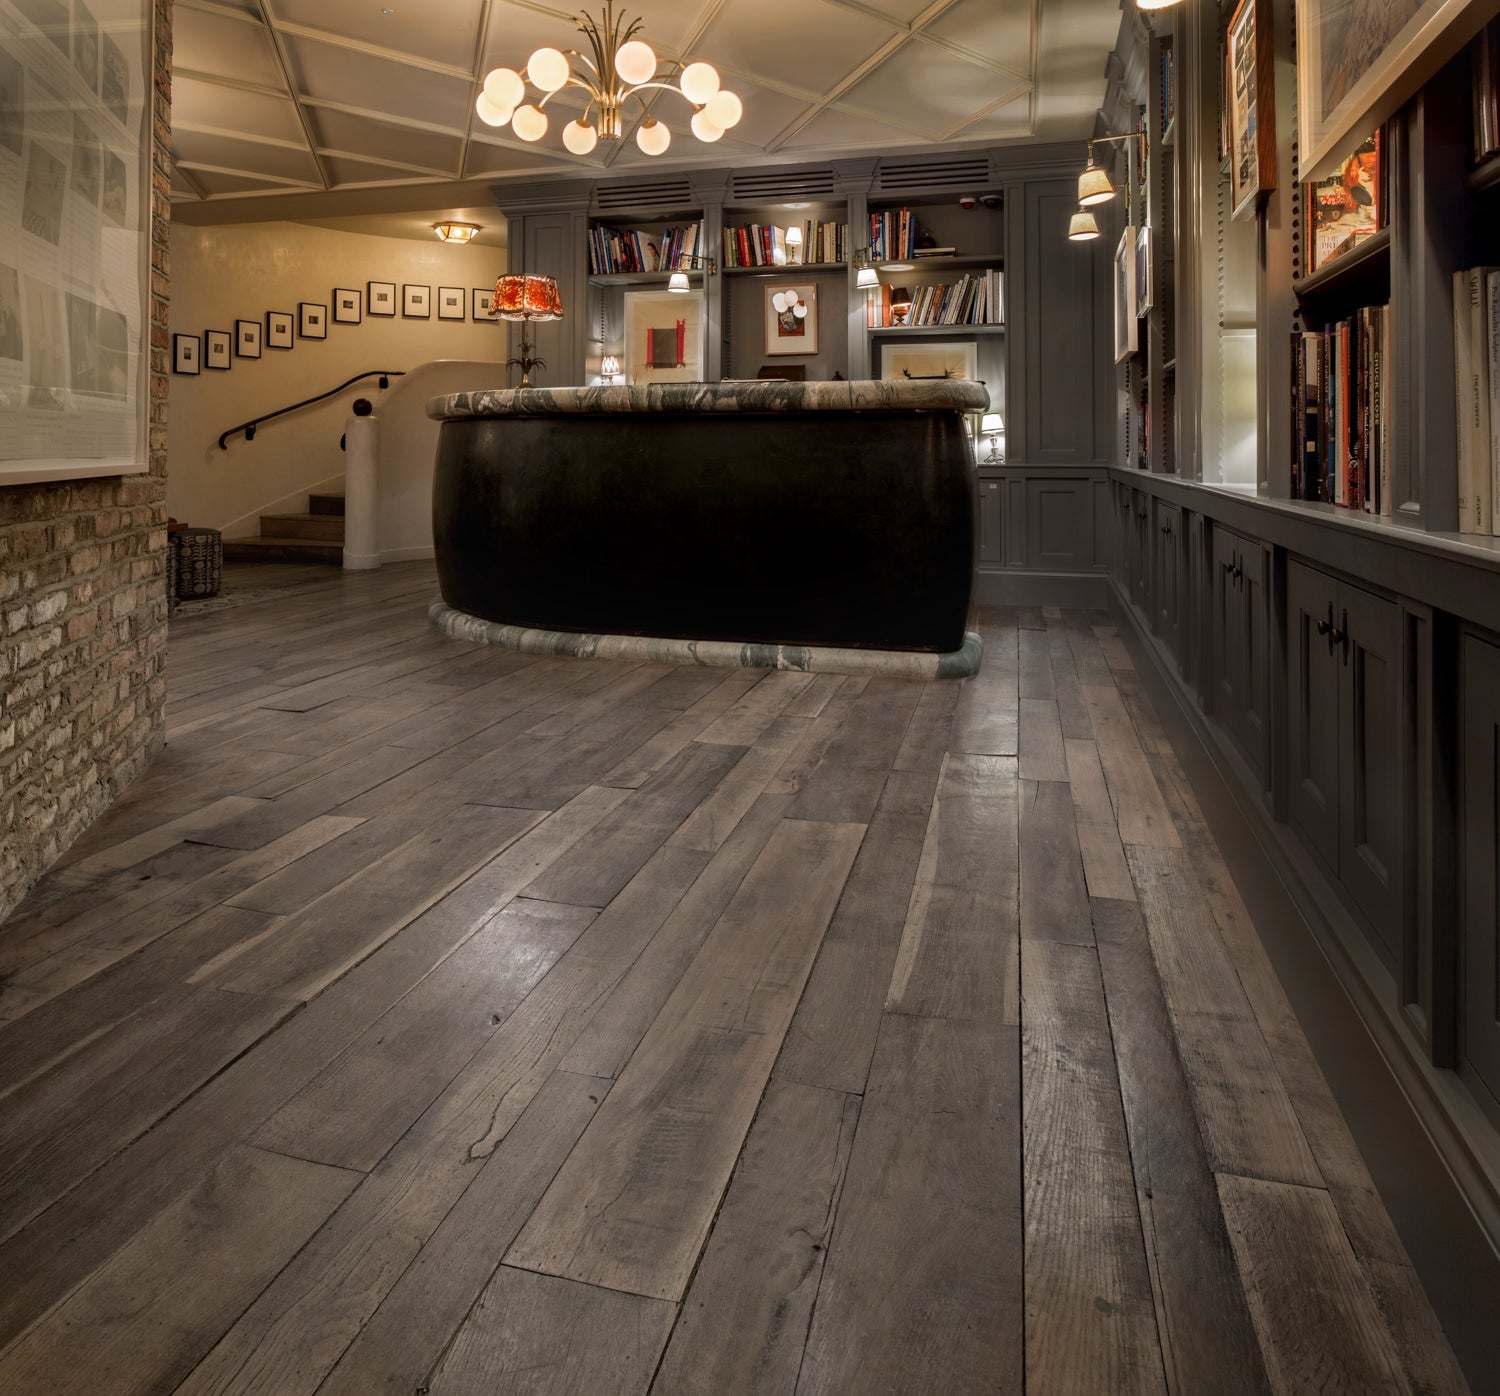 Explore The Beauty And Versatility Of Antique Flooring